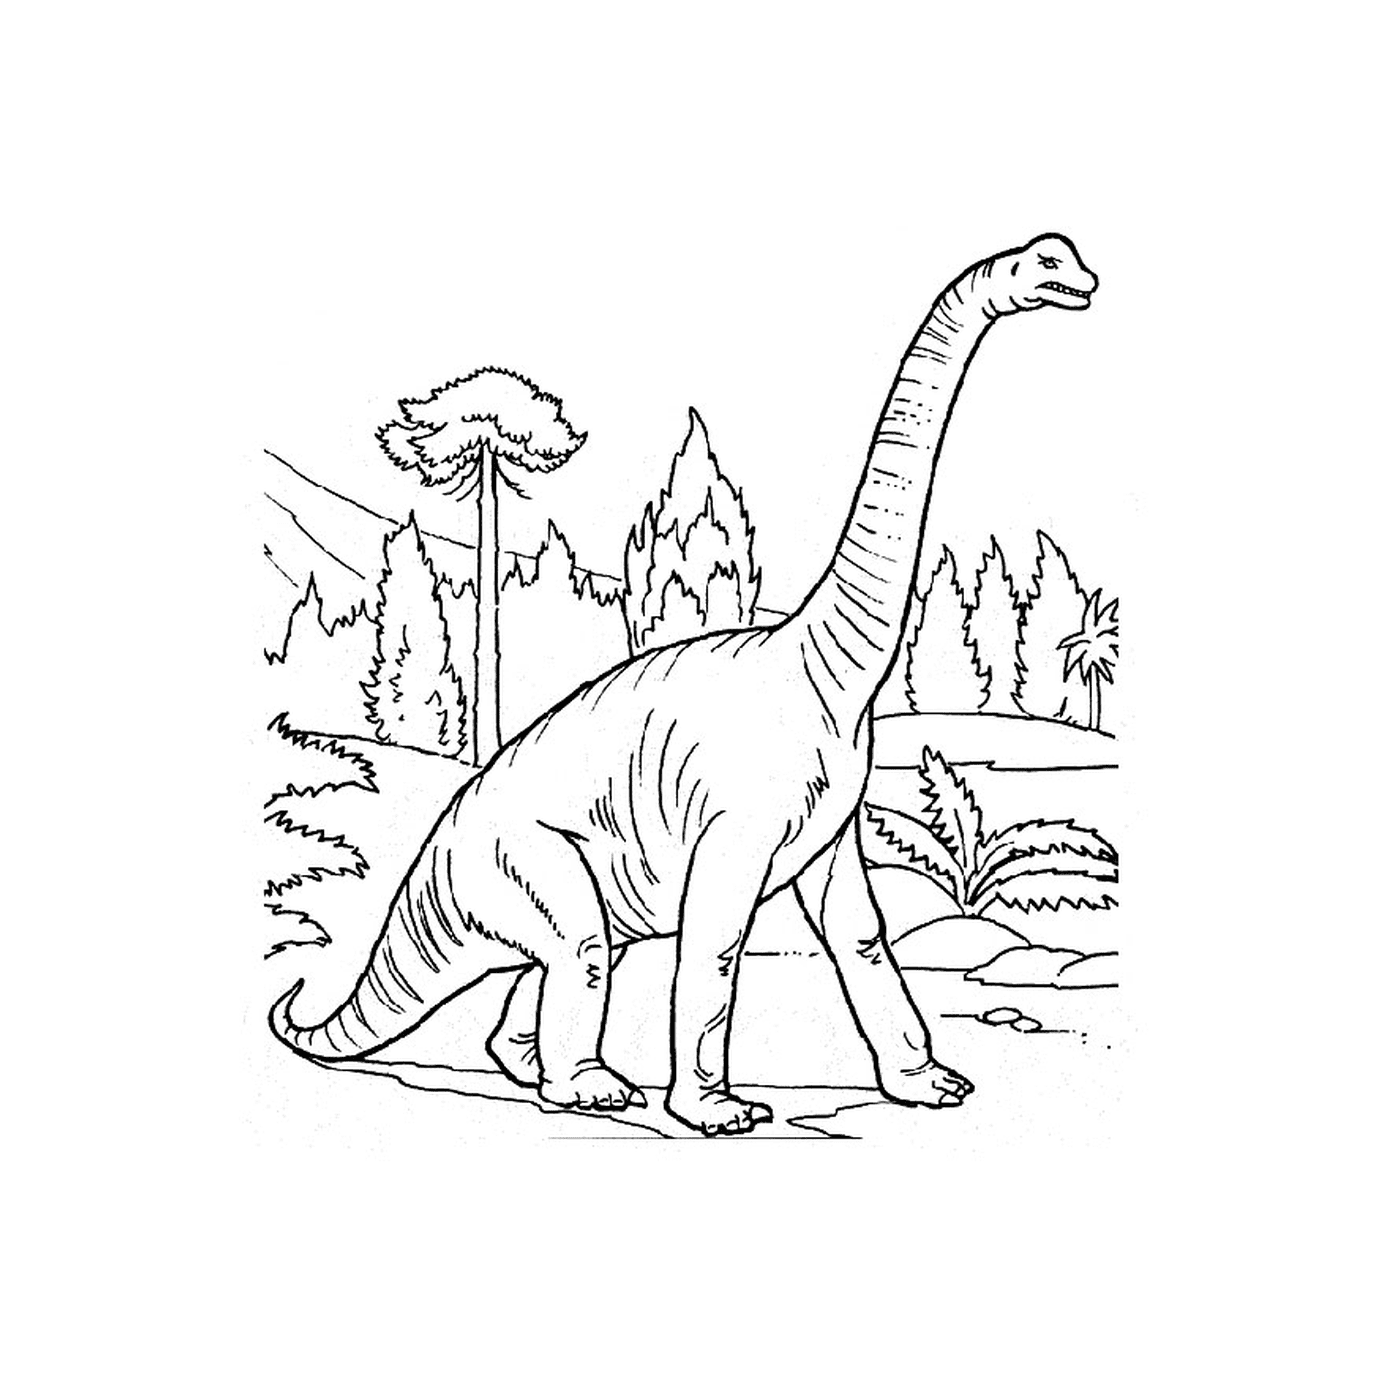  A dinosaur in a forest 